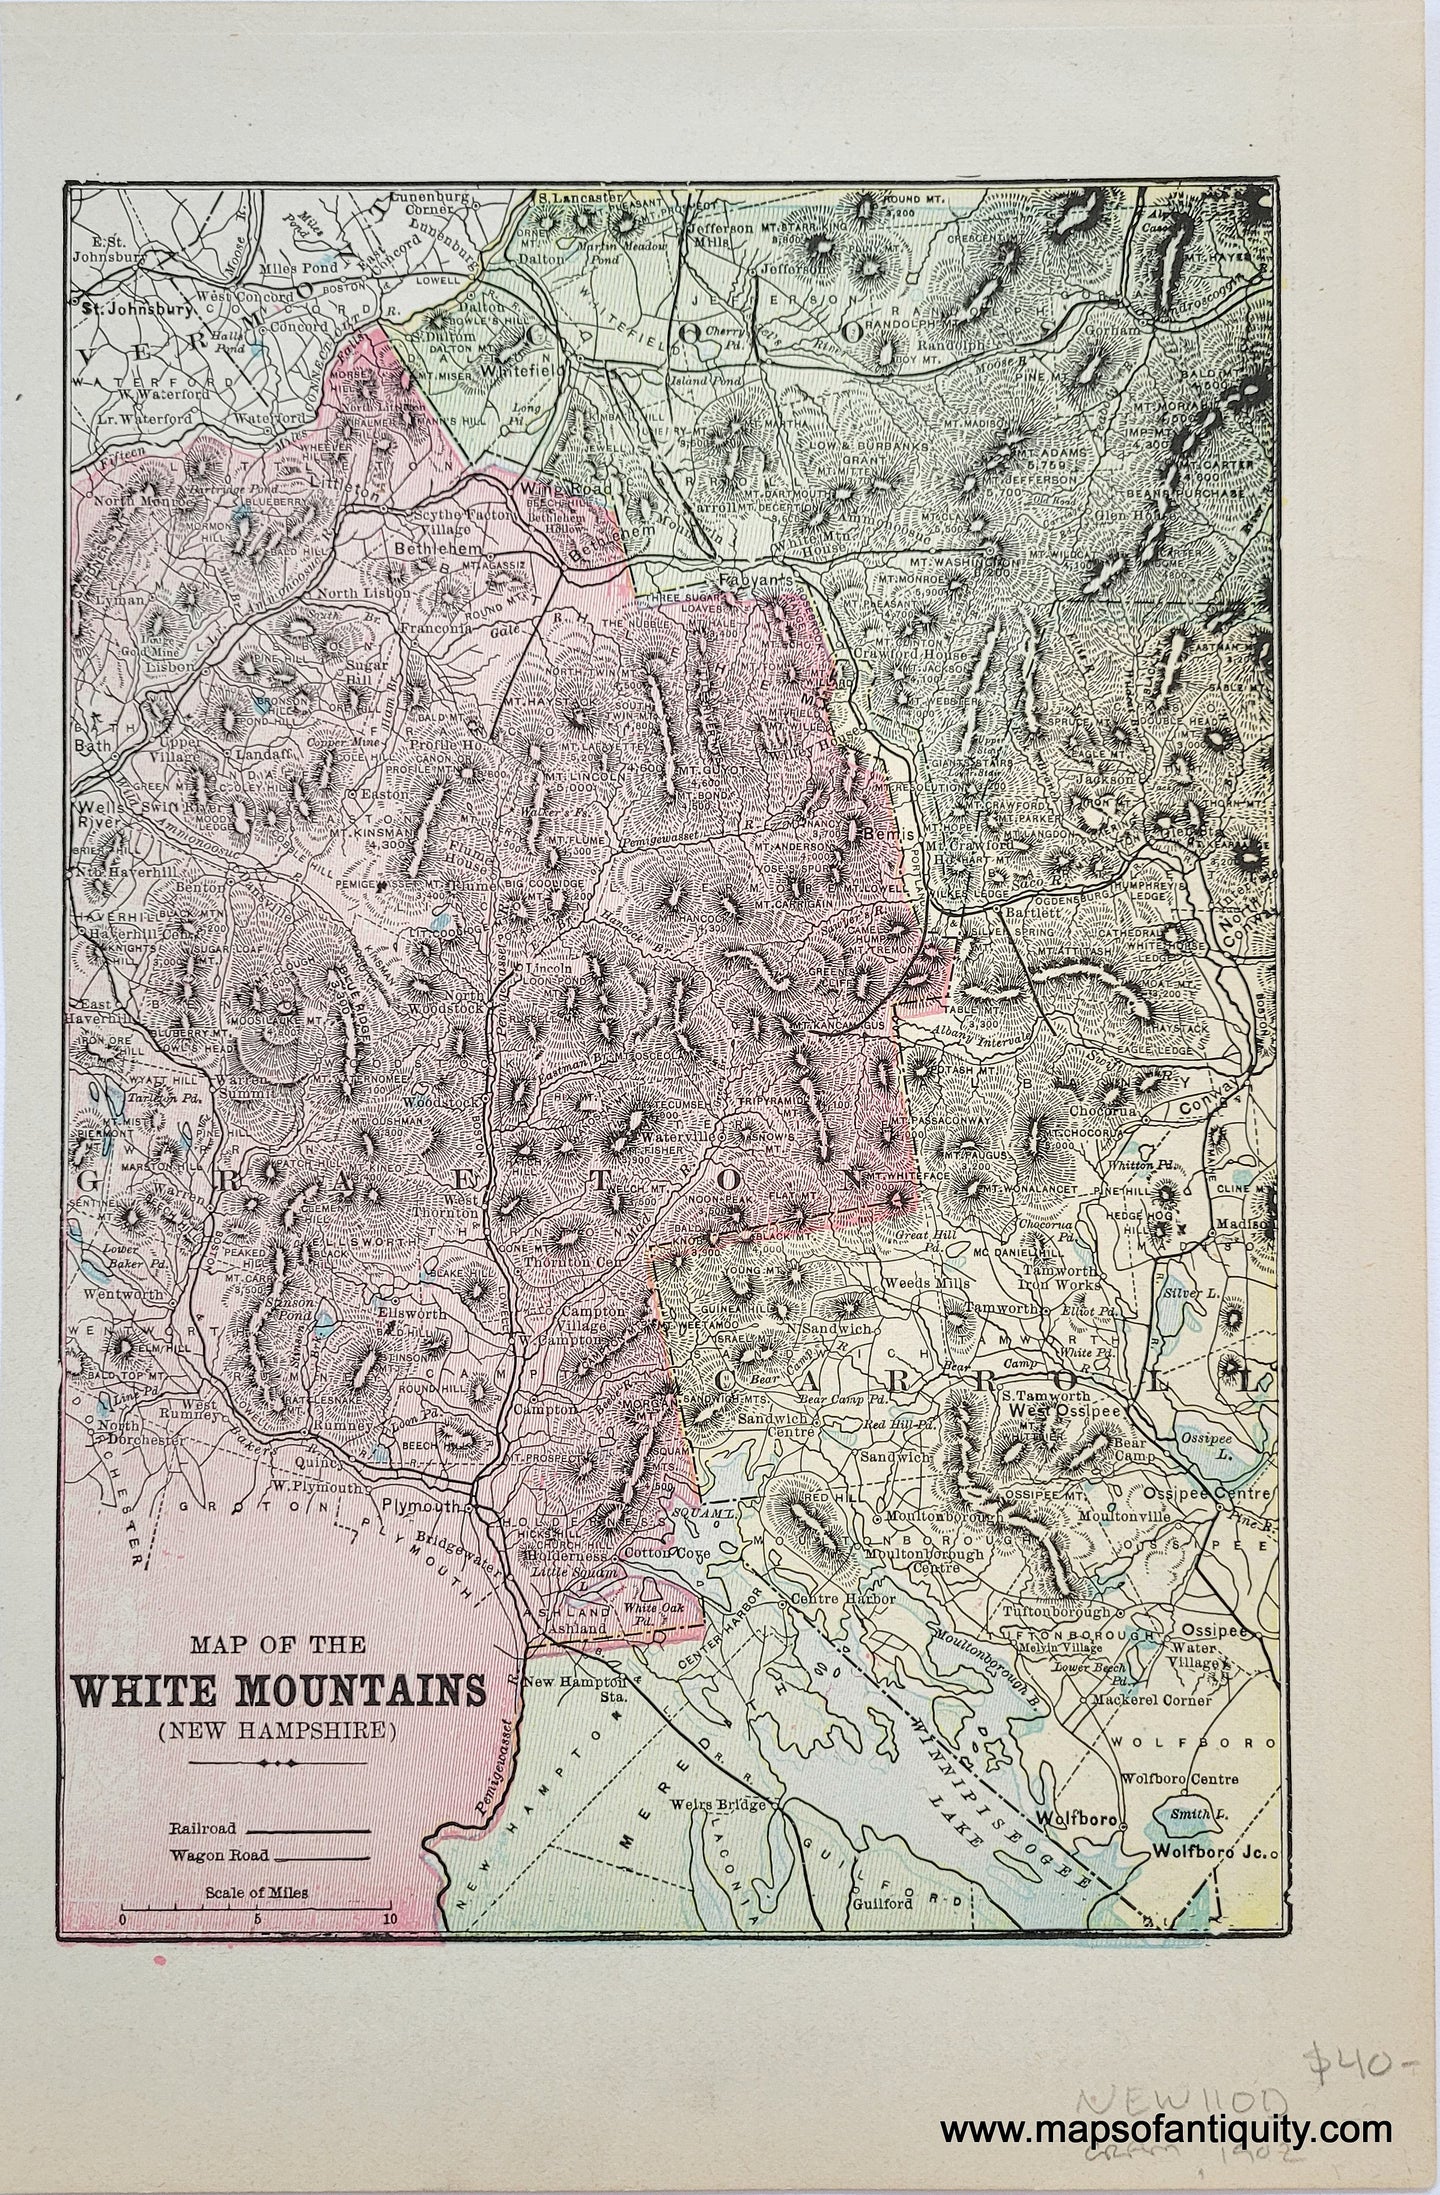 Antique-Printed-Color-Map-of-The-White Mountains New Hamnpshire-Northeast-1900-Cram-Maps-Of-Antiquity